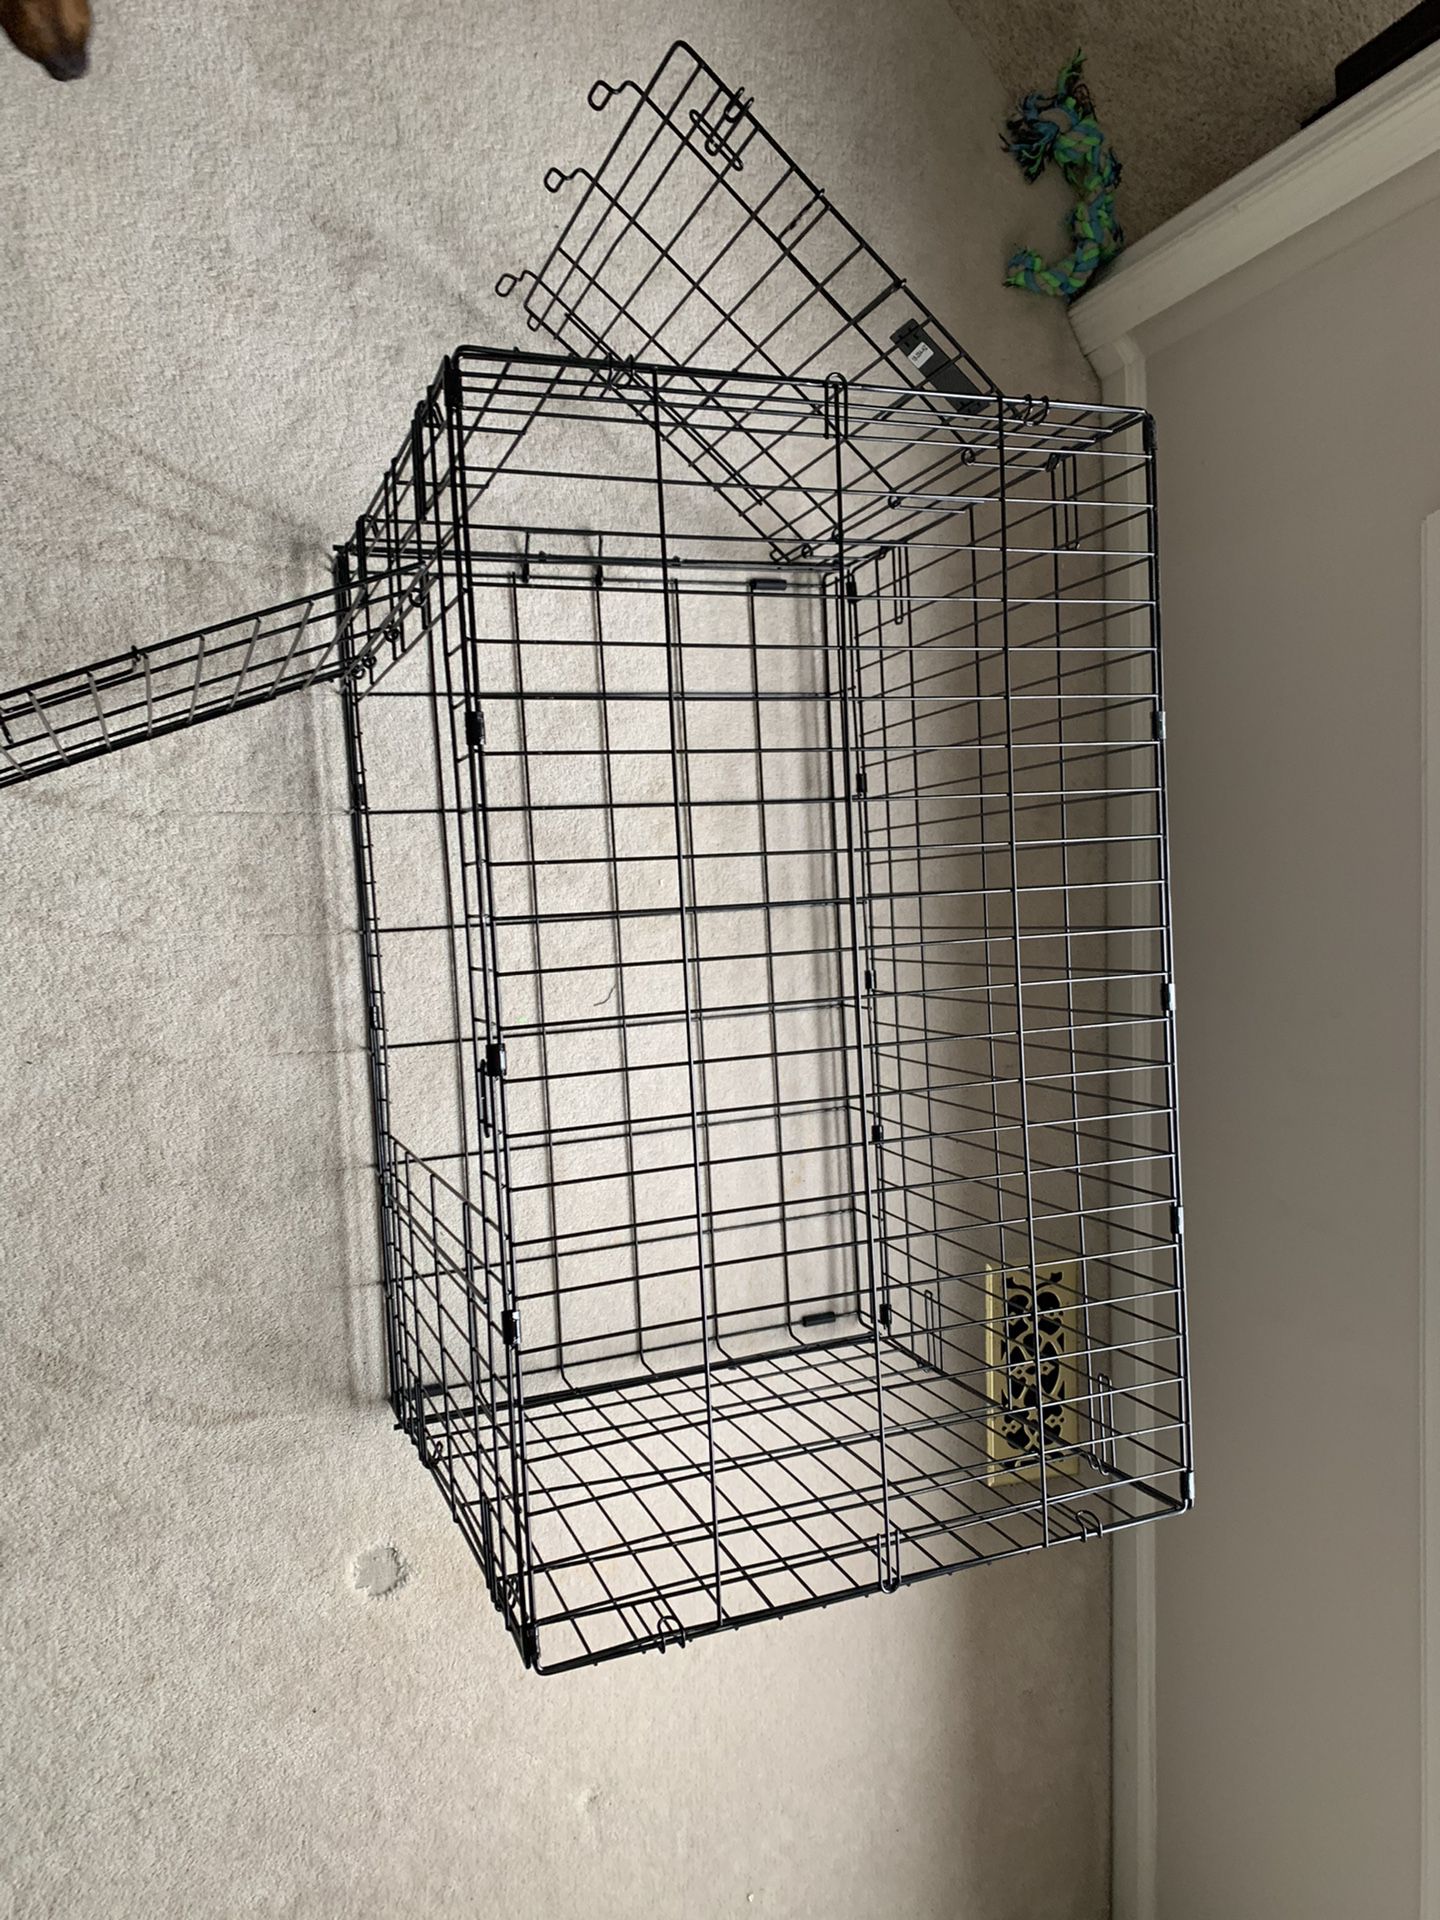 Top Paw Dog Crate